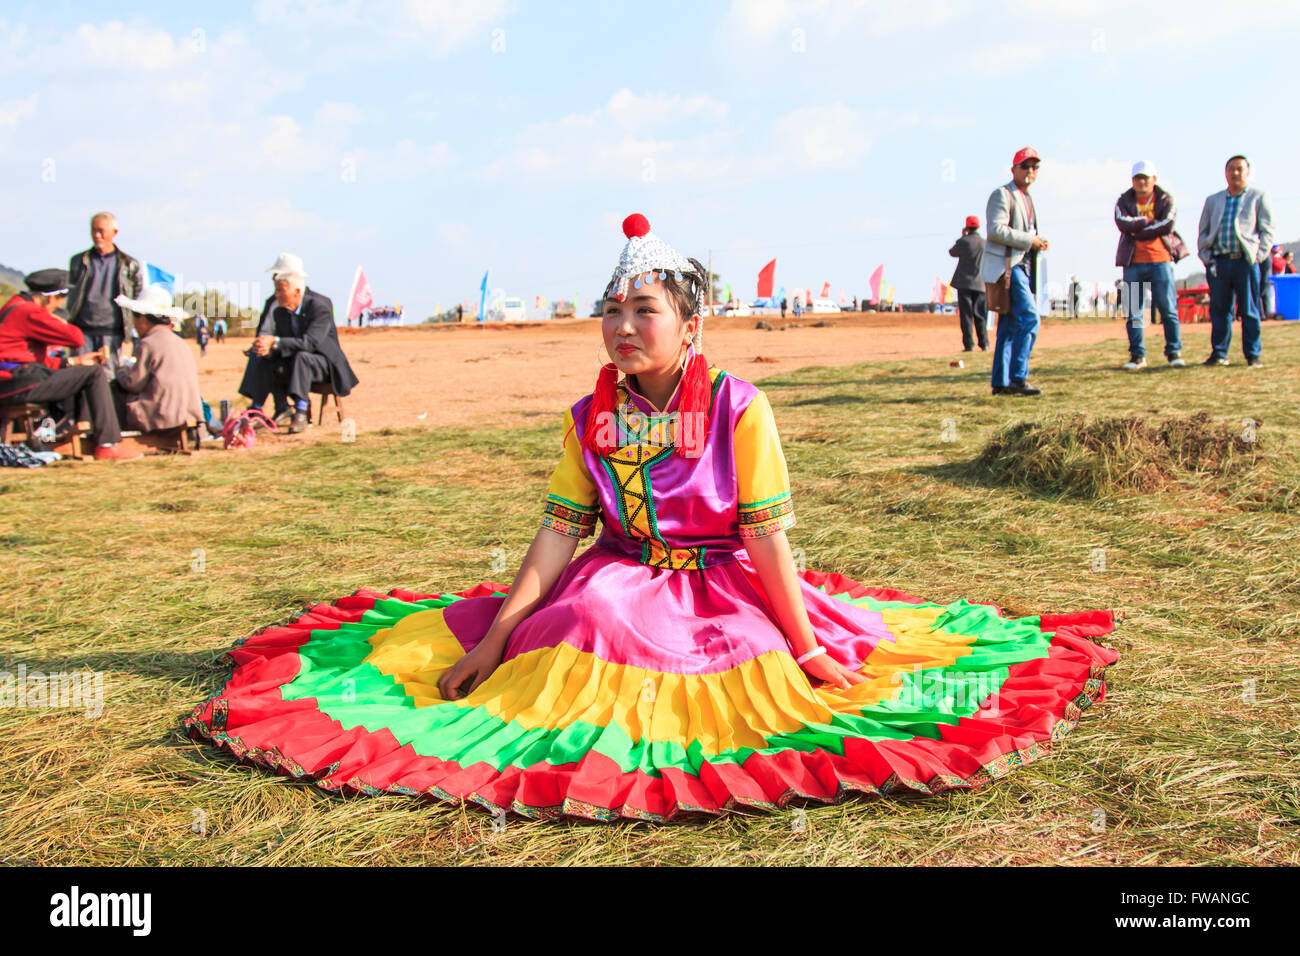 Heqing, China - March 15, 2016: Chinese girl in traditional Chinese clothing during the Heqing Qifeng Pear Flower festival Stock Photo